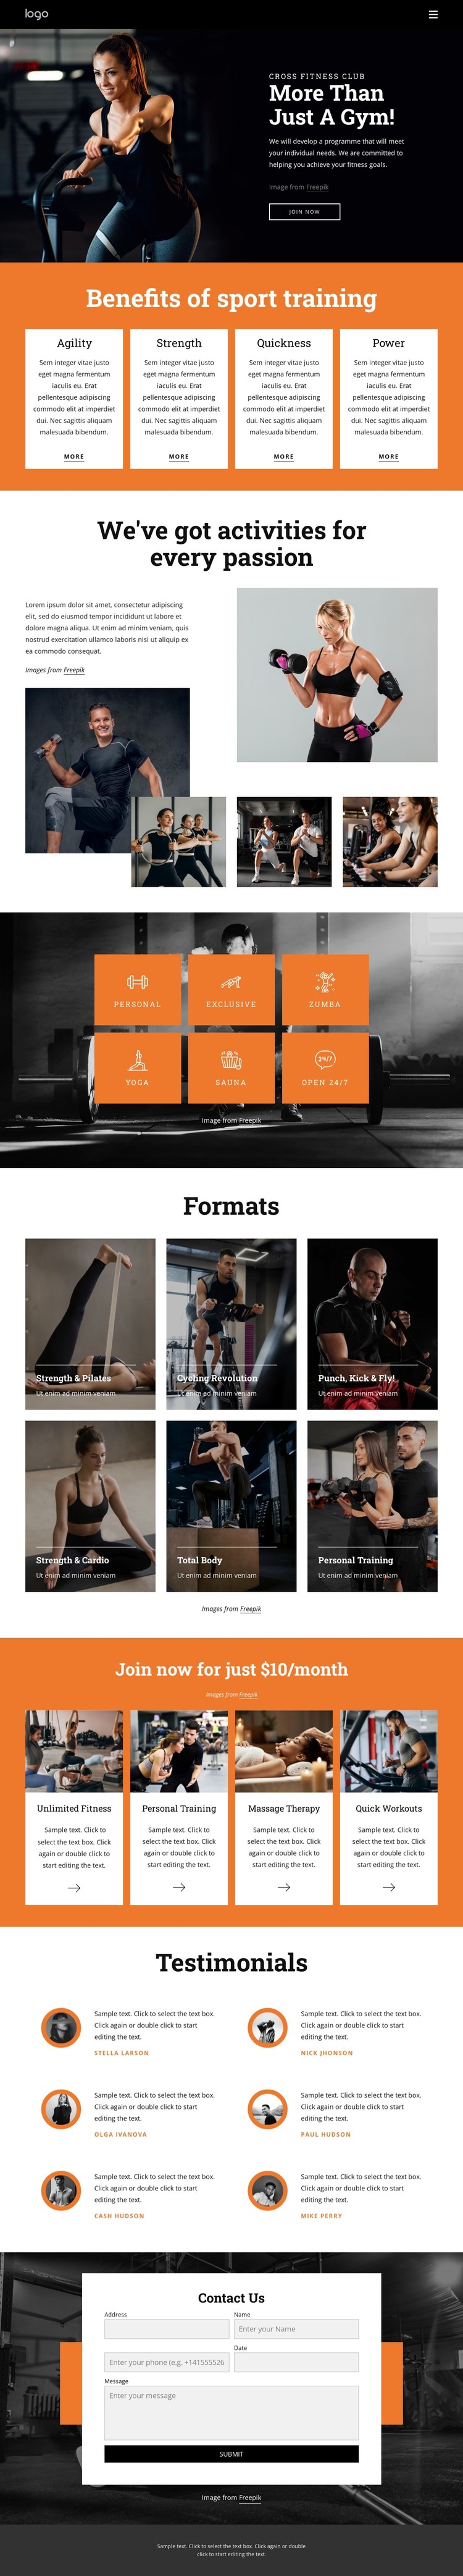 Join our community of fitness enthusiasts Web Design